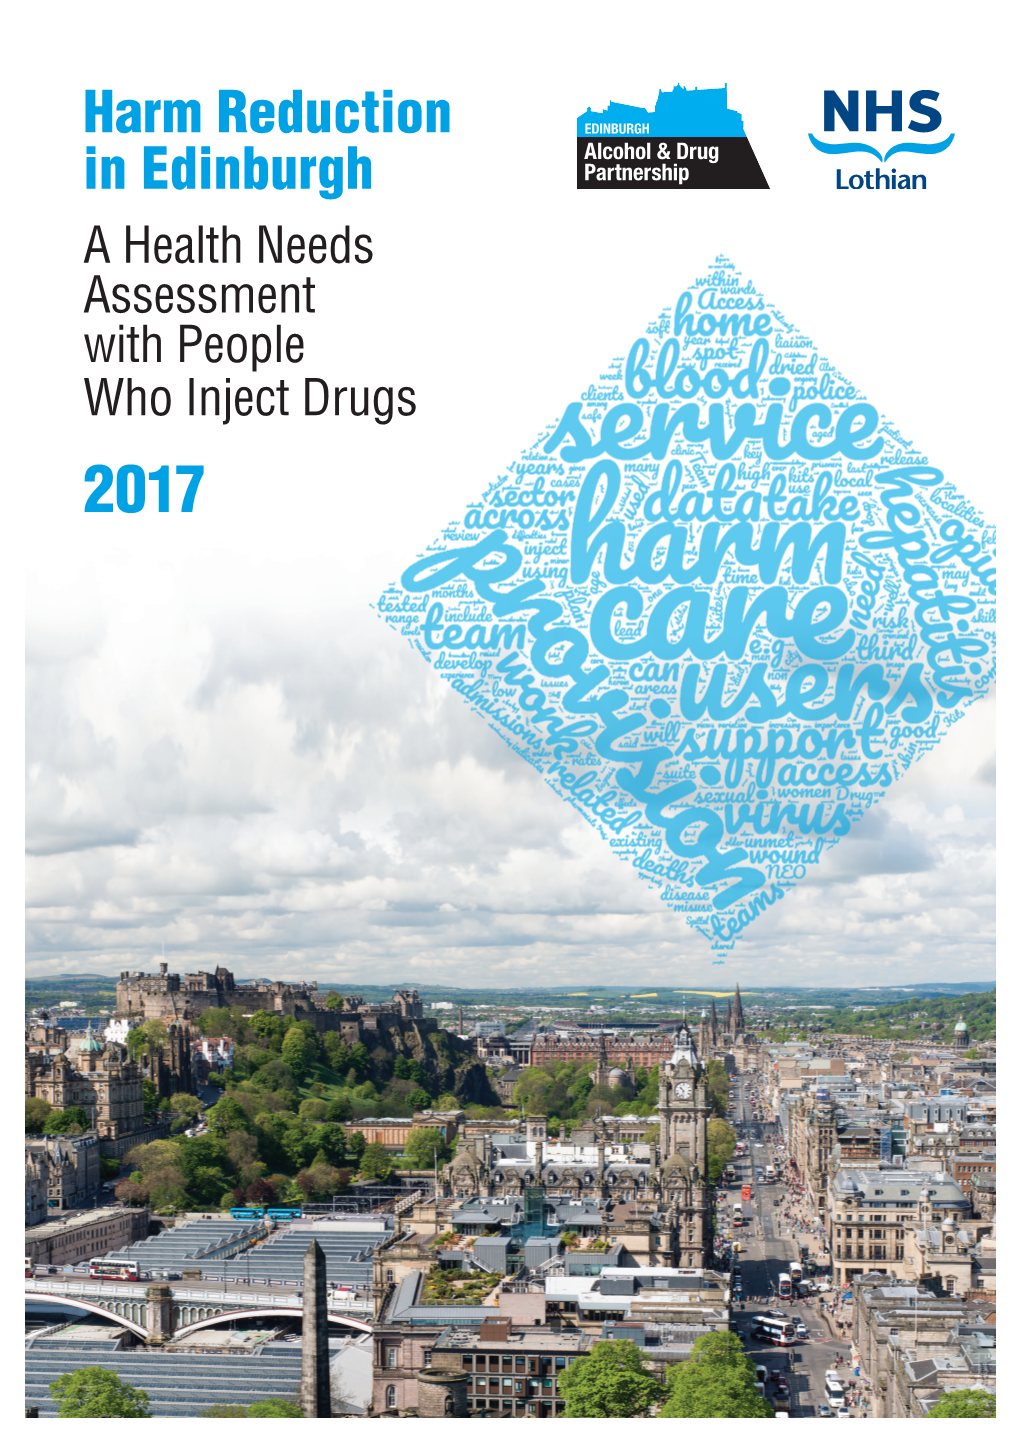 Harm Reduction in Edinburgh- a Health Needs Assessment With